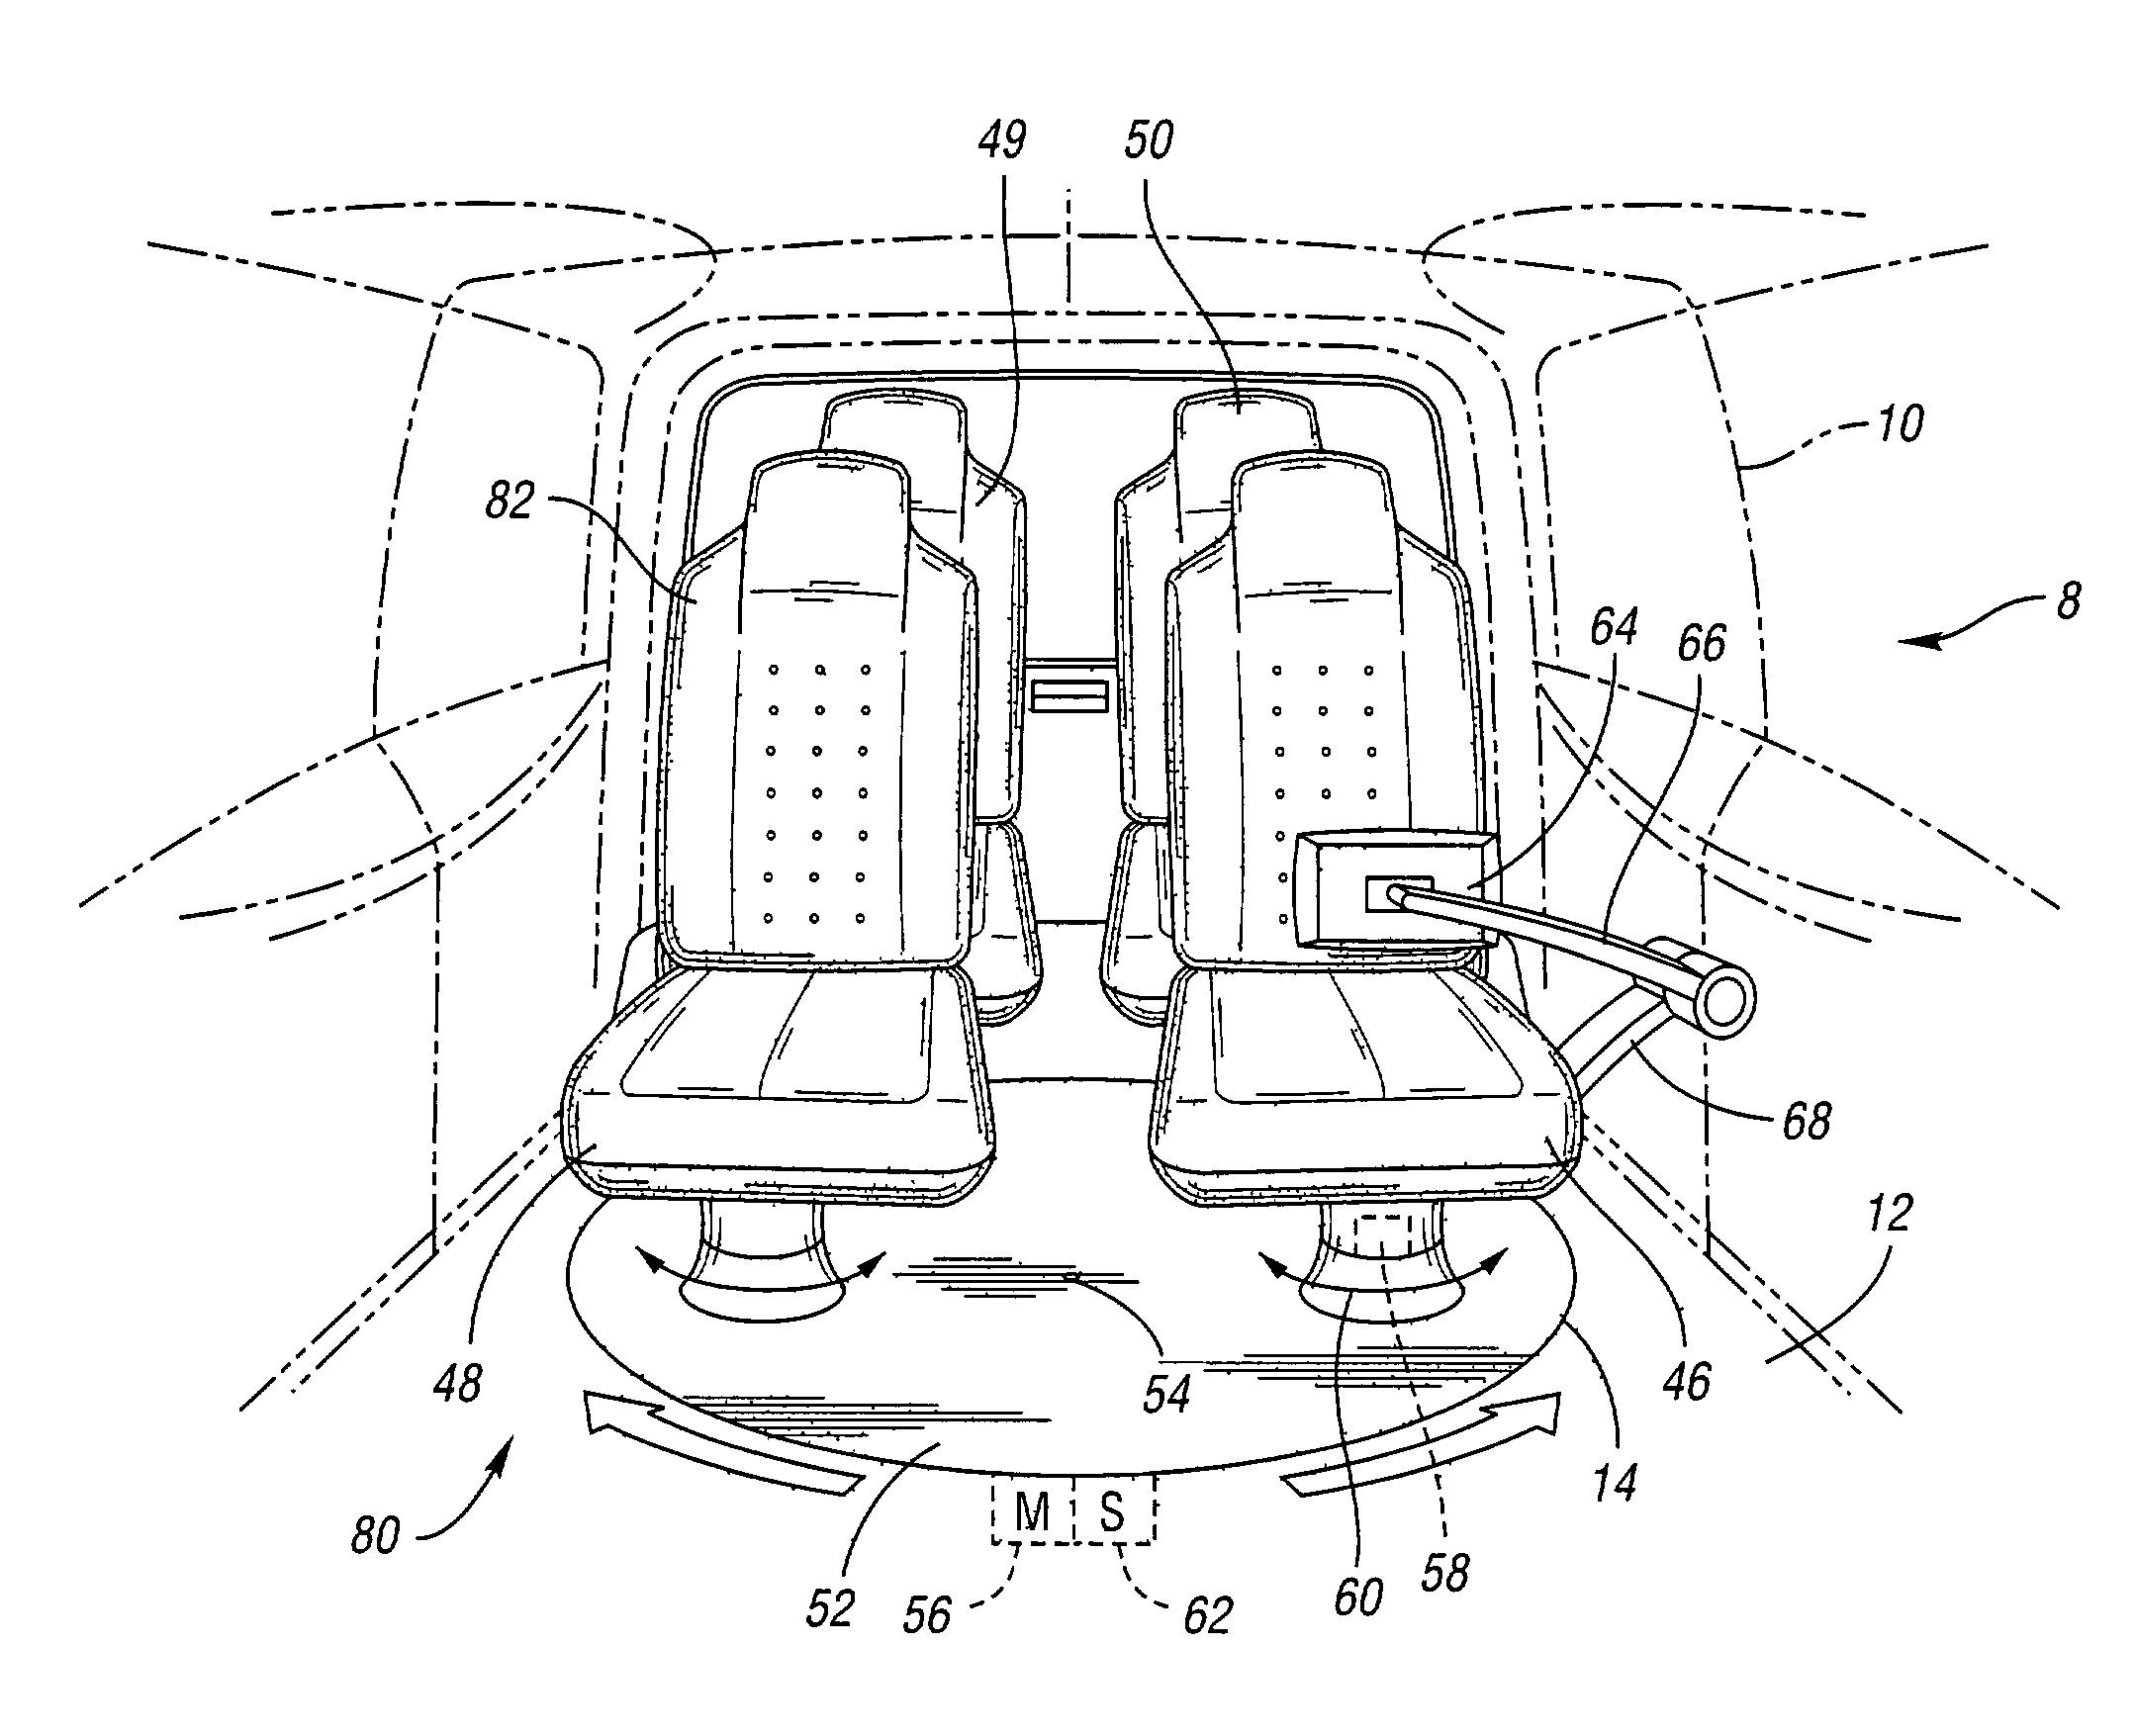 Vehicle having a movable driving position